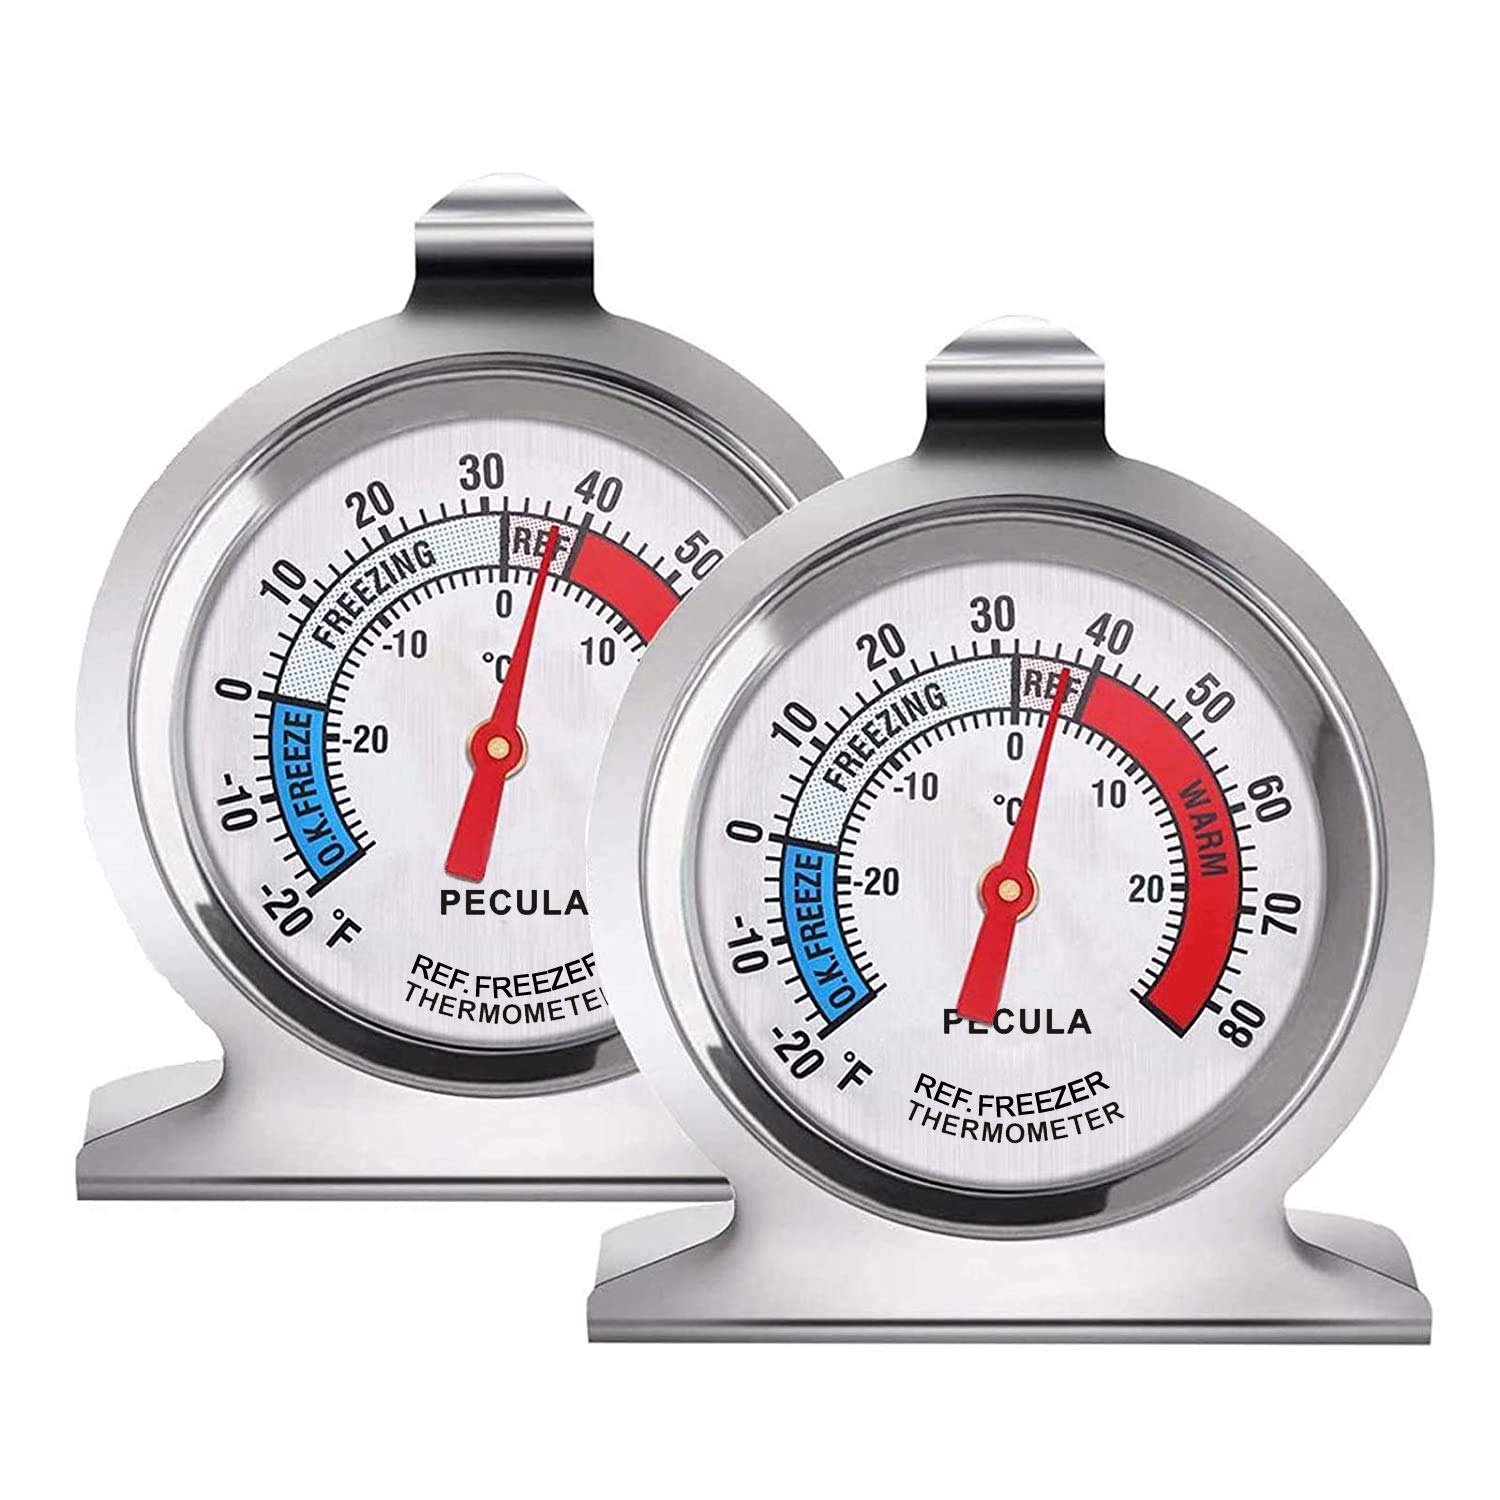 3 Pcs Refrigerator Freezer Thermometer Classic Large Dial Fridge Thermometers Fahrenheit and Celsius Cooler Temperature Monitor with Indicator 